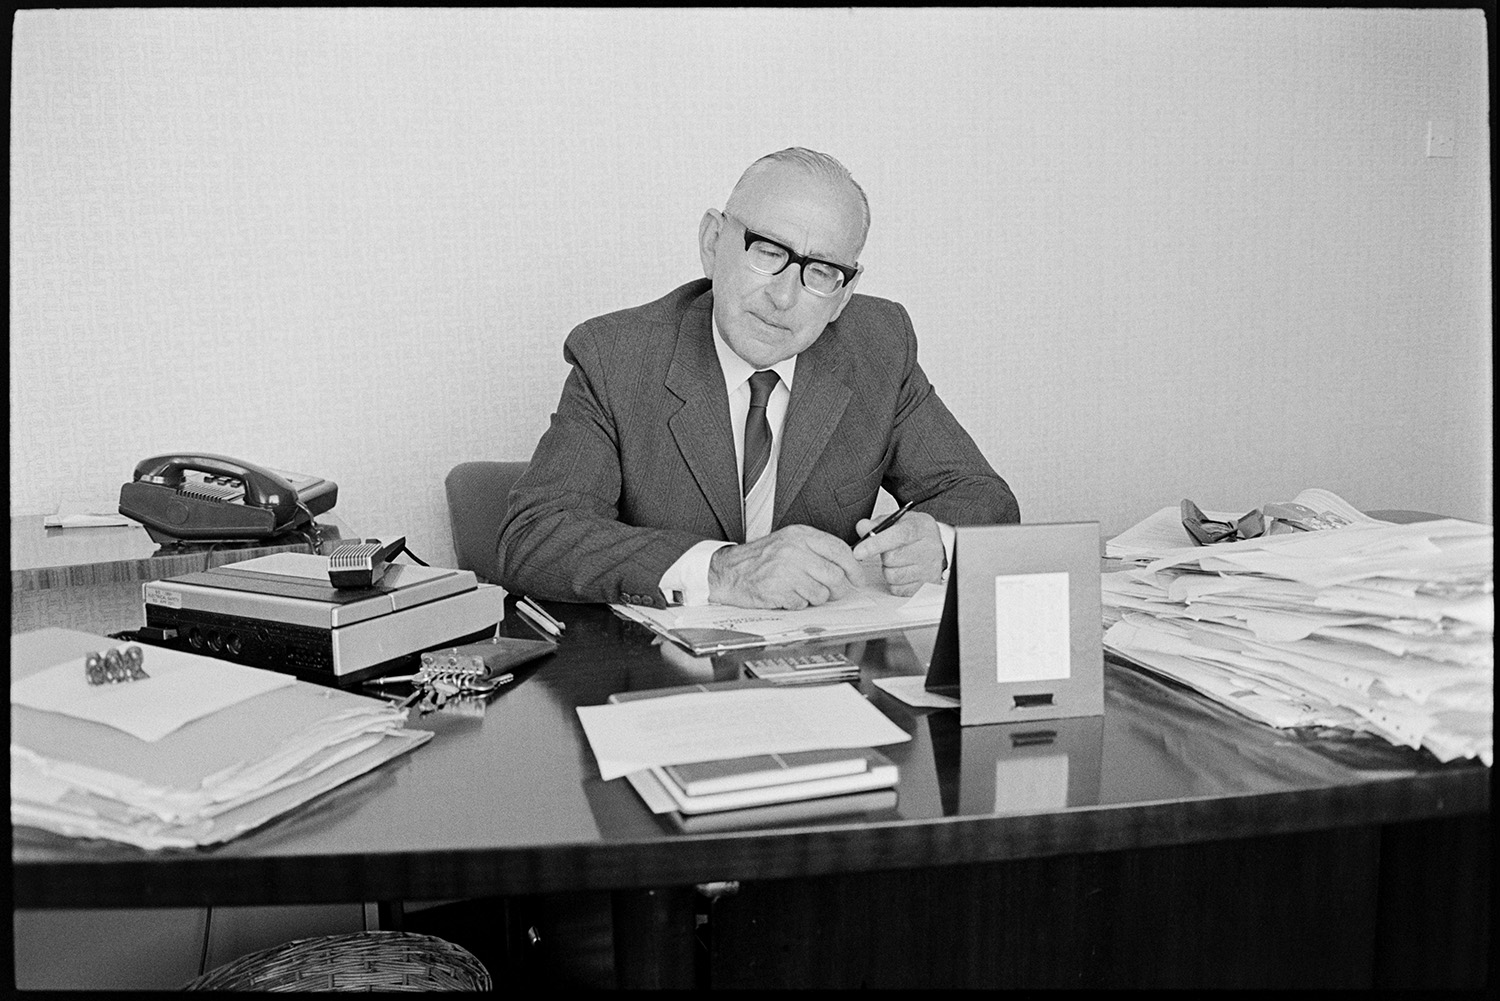 Manager at his desk, Insurance firm?? Mayor of Bideford chatting to photographer. 
[A man sat at a desk in an office, possibly at an Insurance Firm, in Bideford. Various papers, a telephone and a calculator can be seen on the desk.]